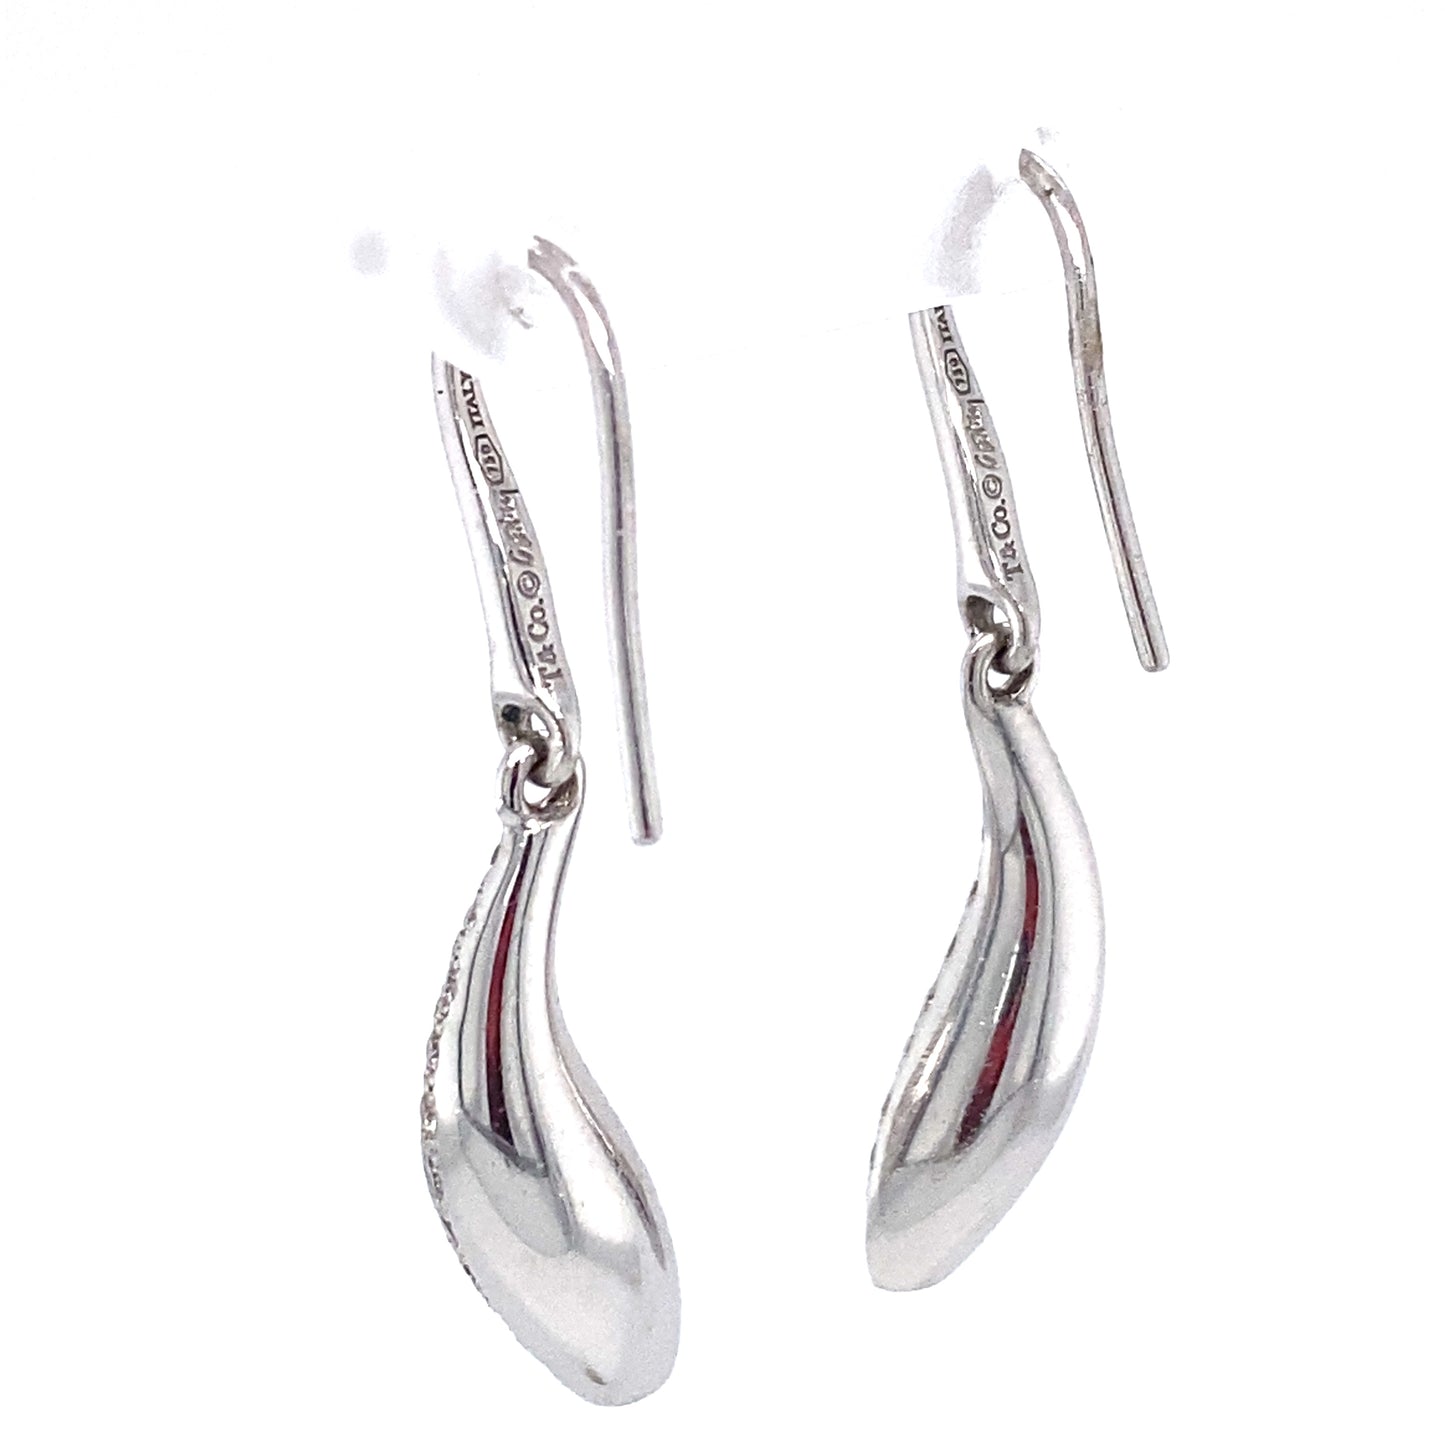 Tiffany & Co Frank Gehry Pavé Diamond Fish Earrings in 18K White Gold